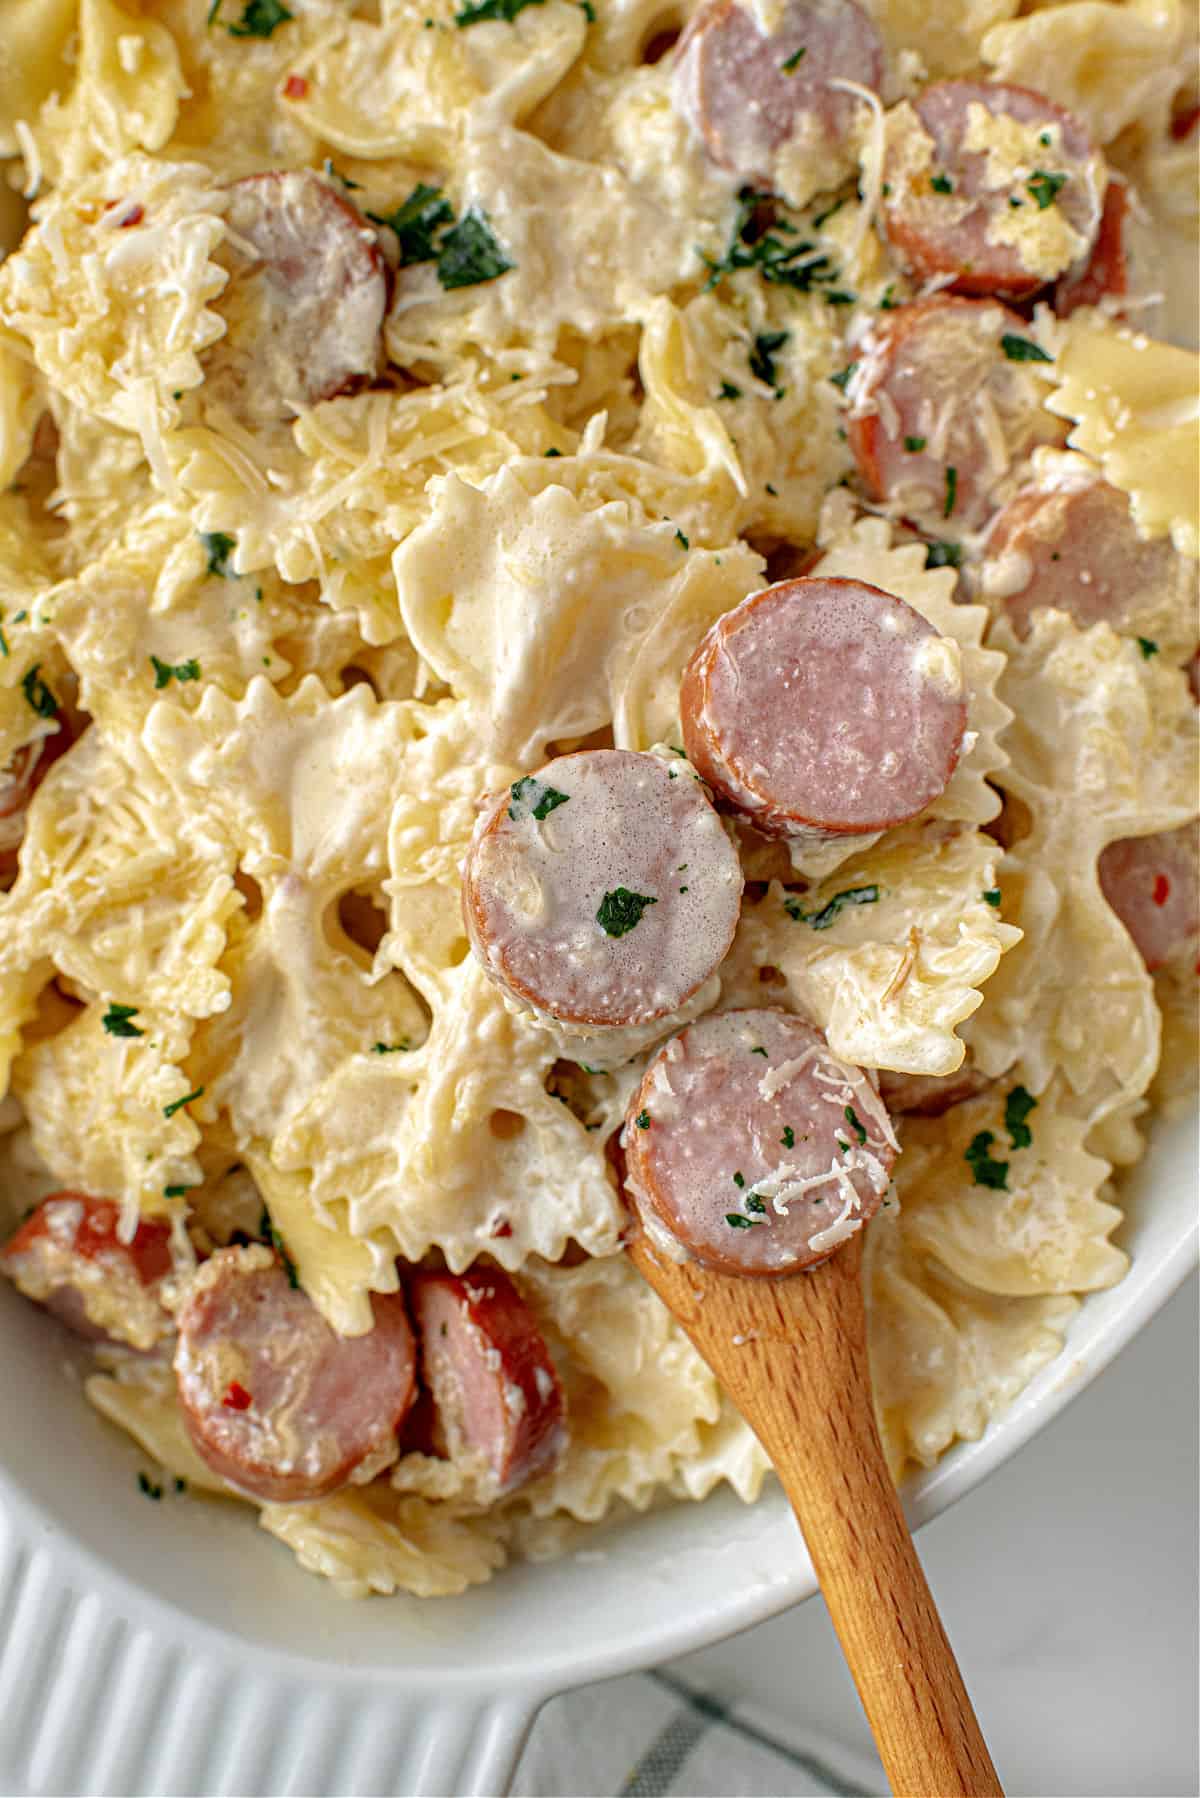 Bowtie pasta with sausage slices and alfredo sauce in a baking dish.